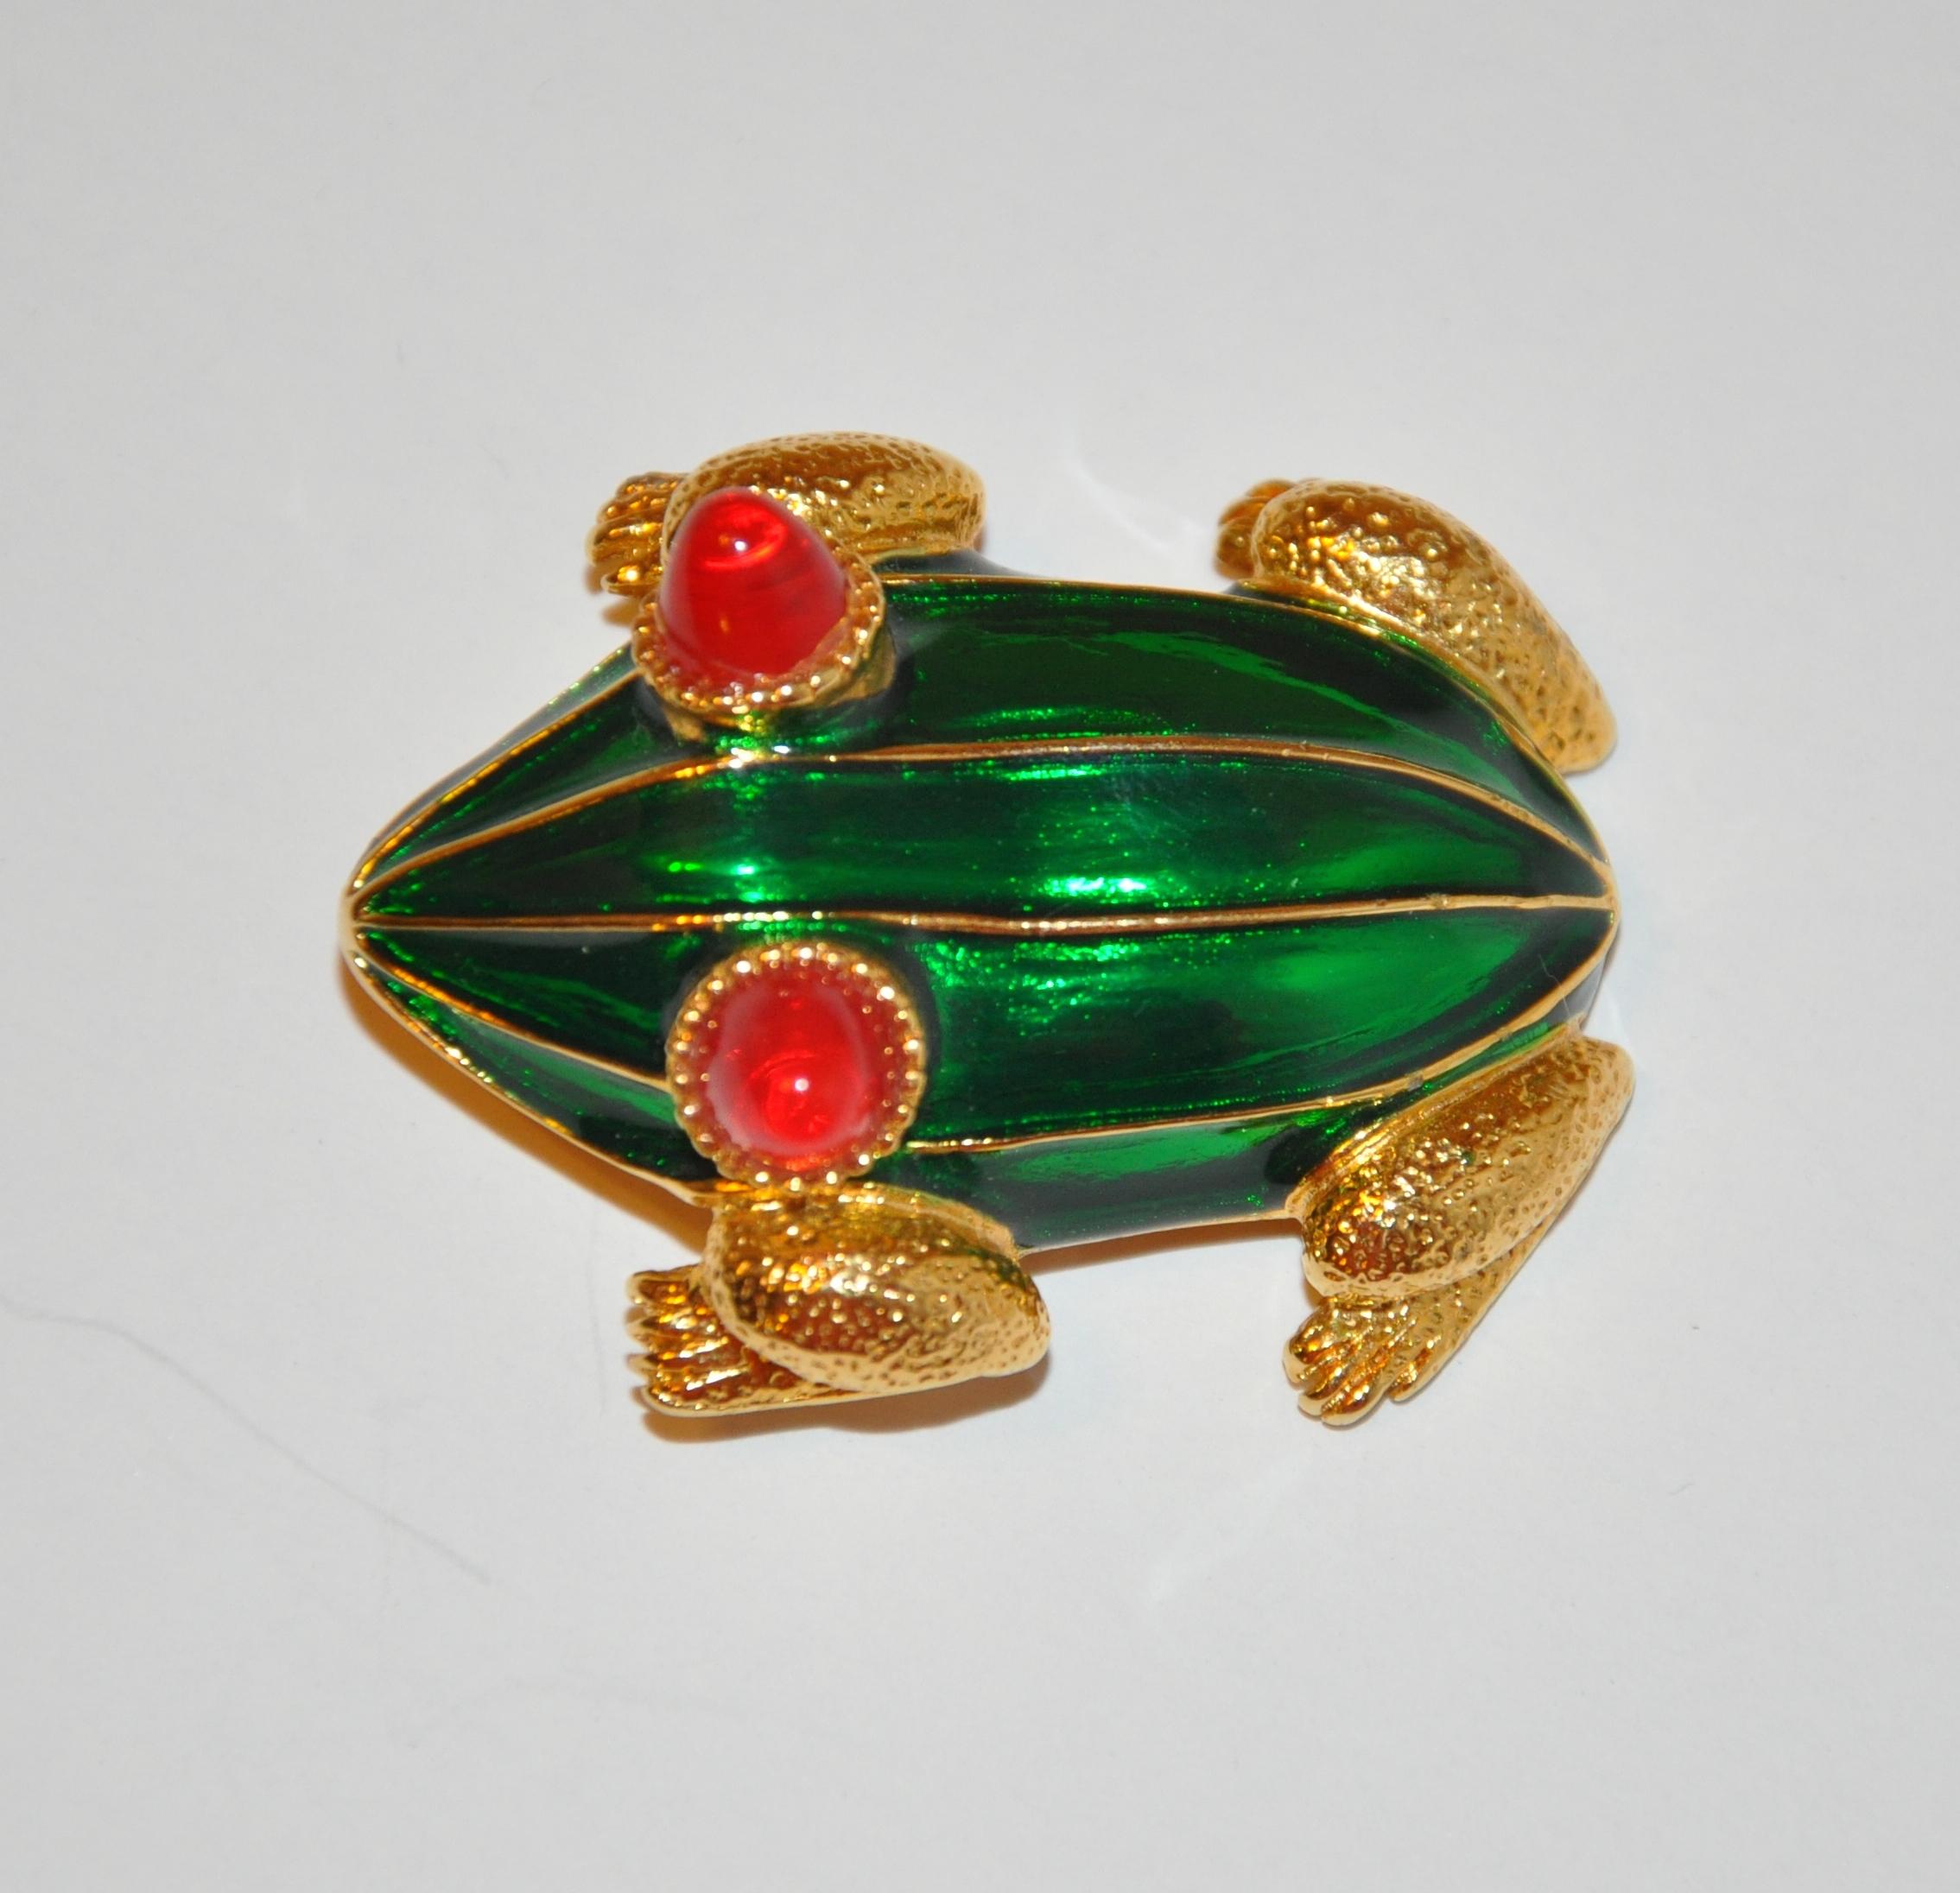        Kenneth Lane rare wonderfully vivid whimsical gilded gold vermeil hardware with Irish-Green overlay enamel accented with ruby-like eyes. Surrounding the eyes are micro studs. The length measures 1 7/8 inches. The width measures 1 3/8 inches,